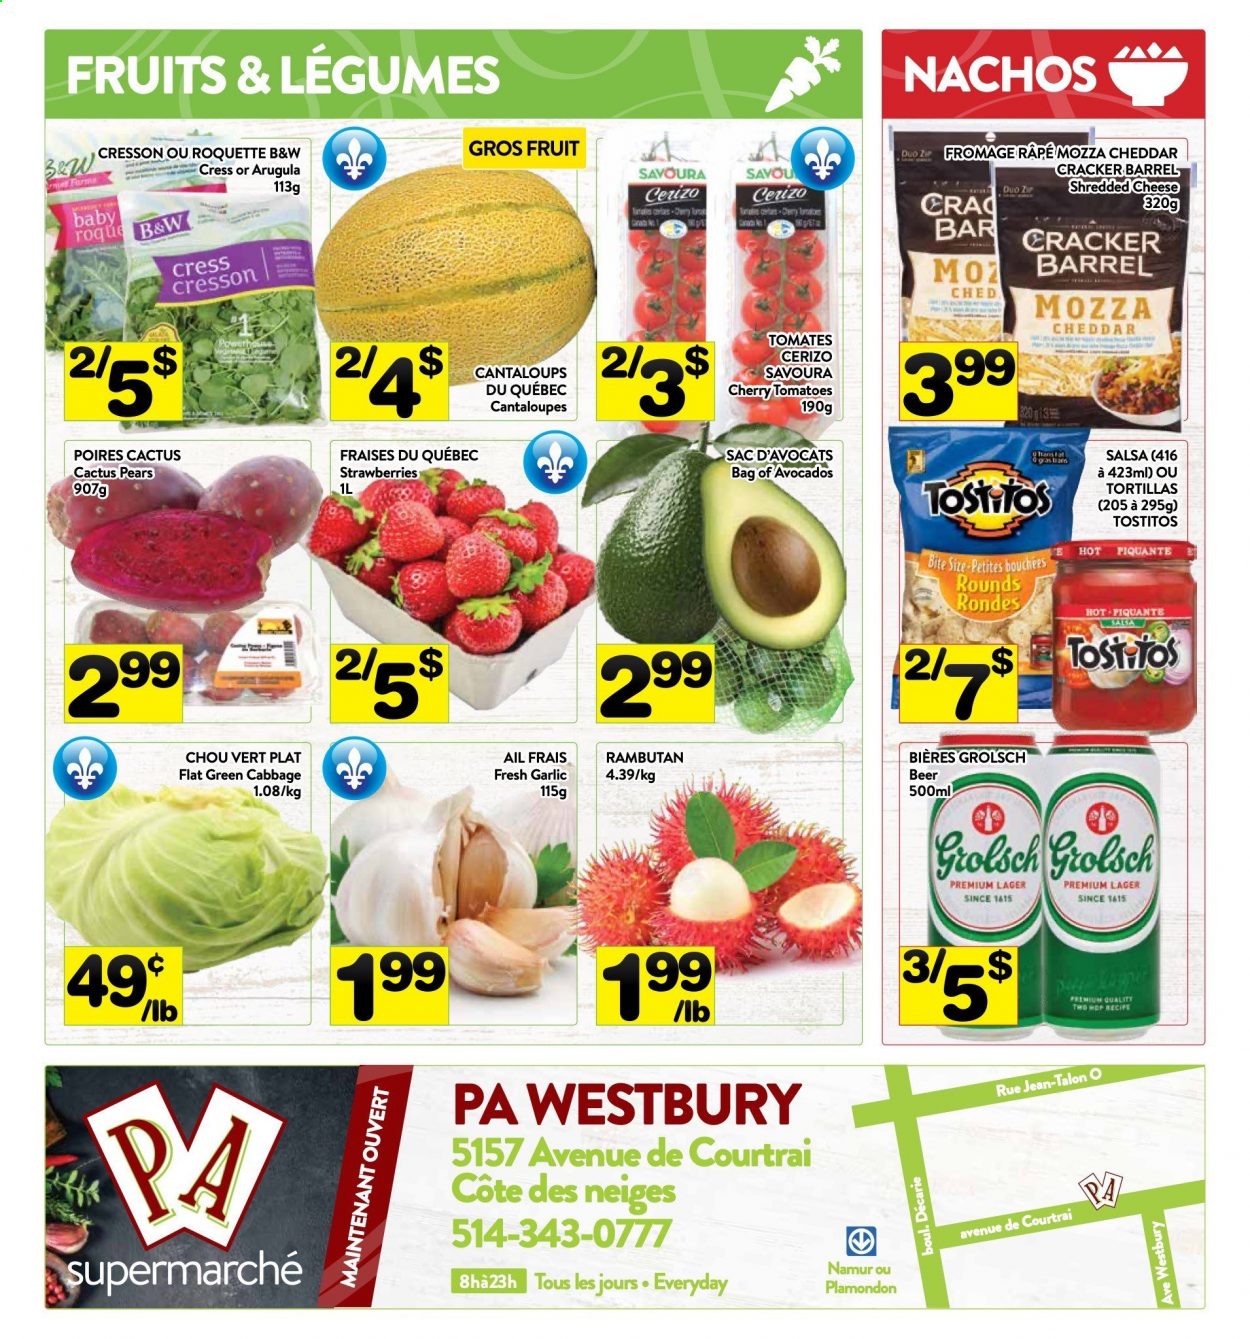 PA Supermarché flyer  - August 30, 2021 - September 05, 2021.